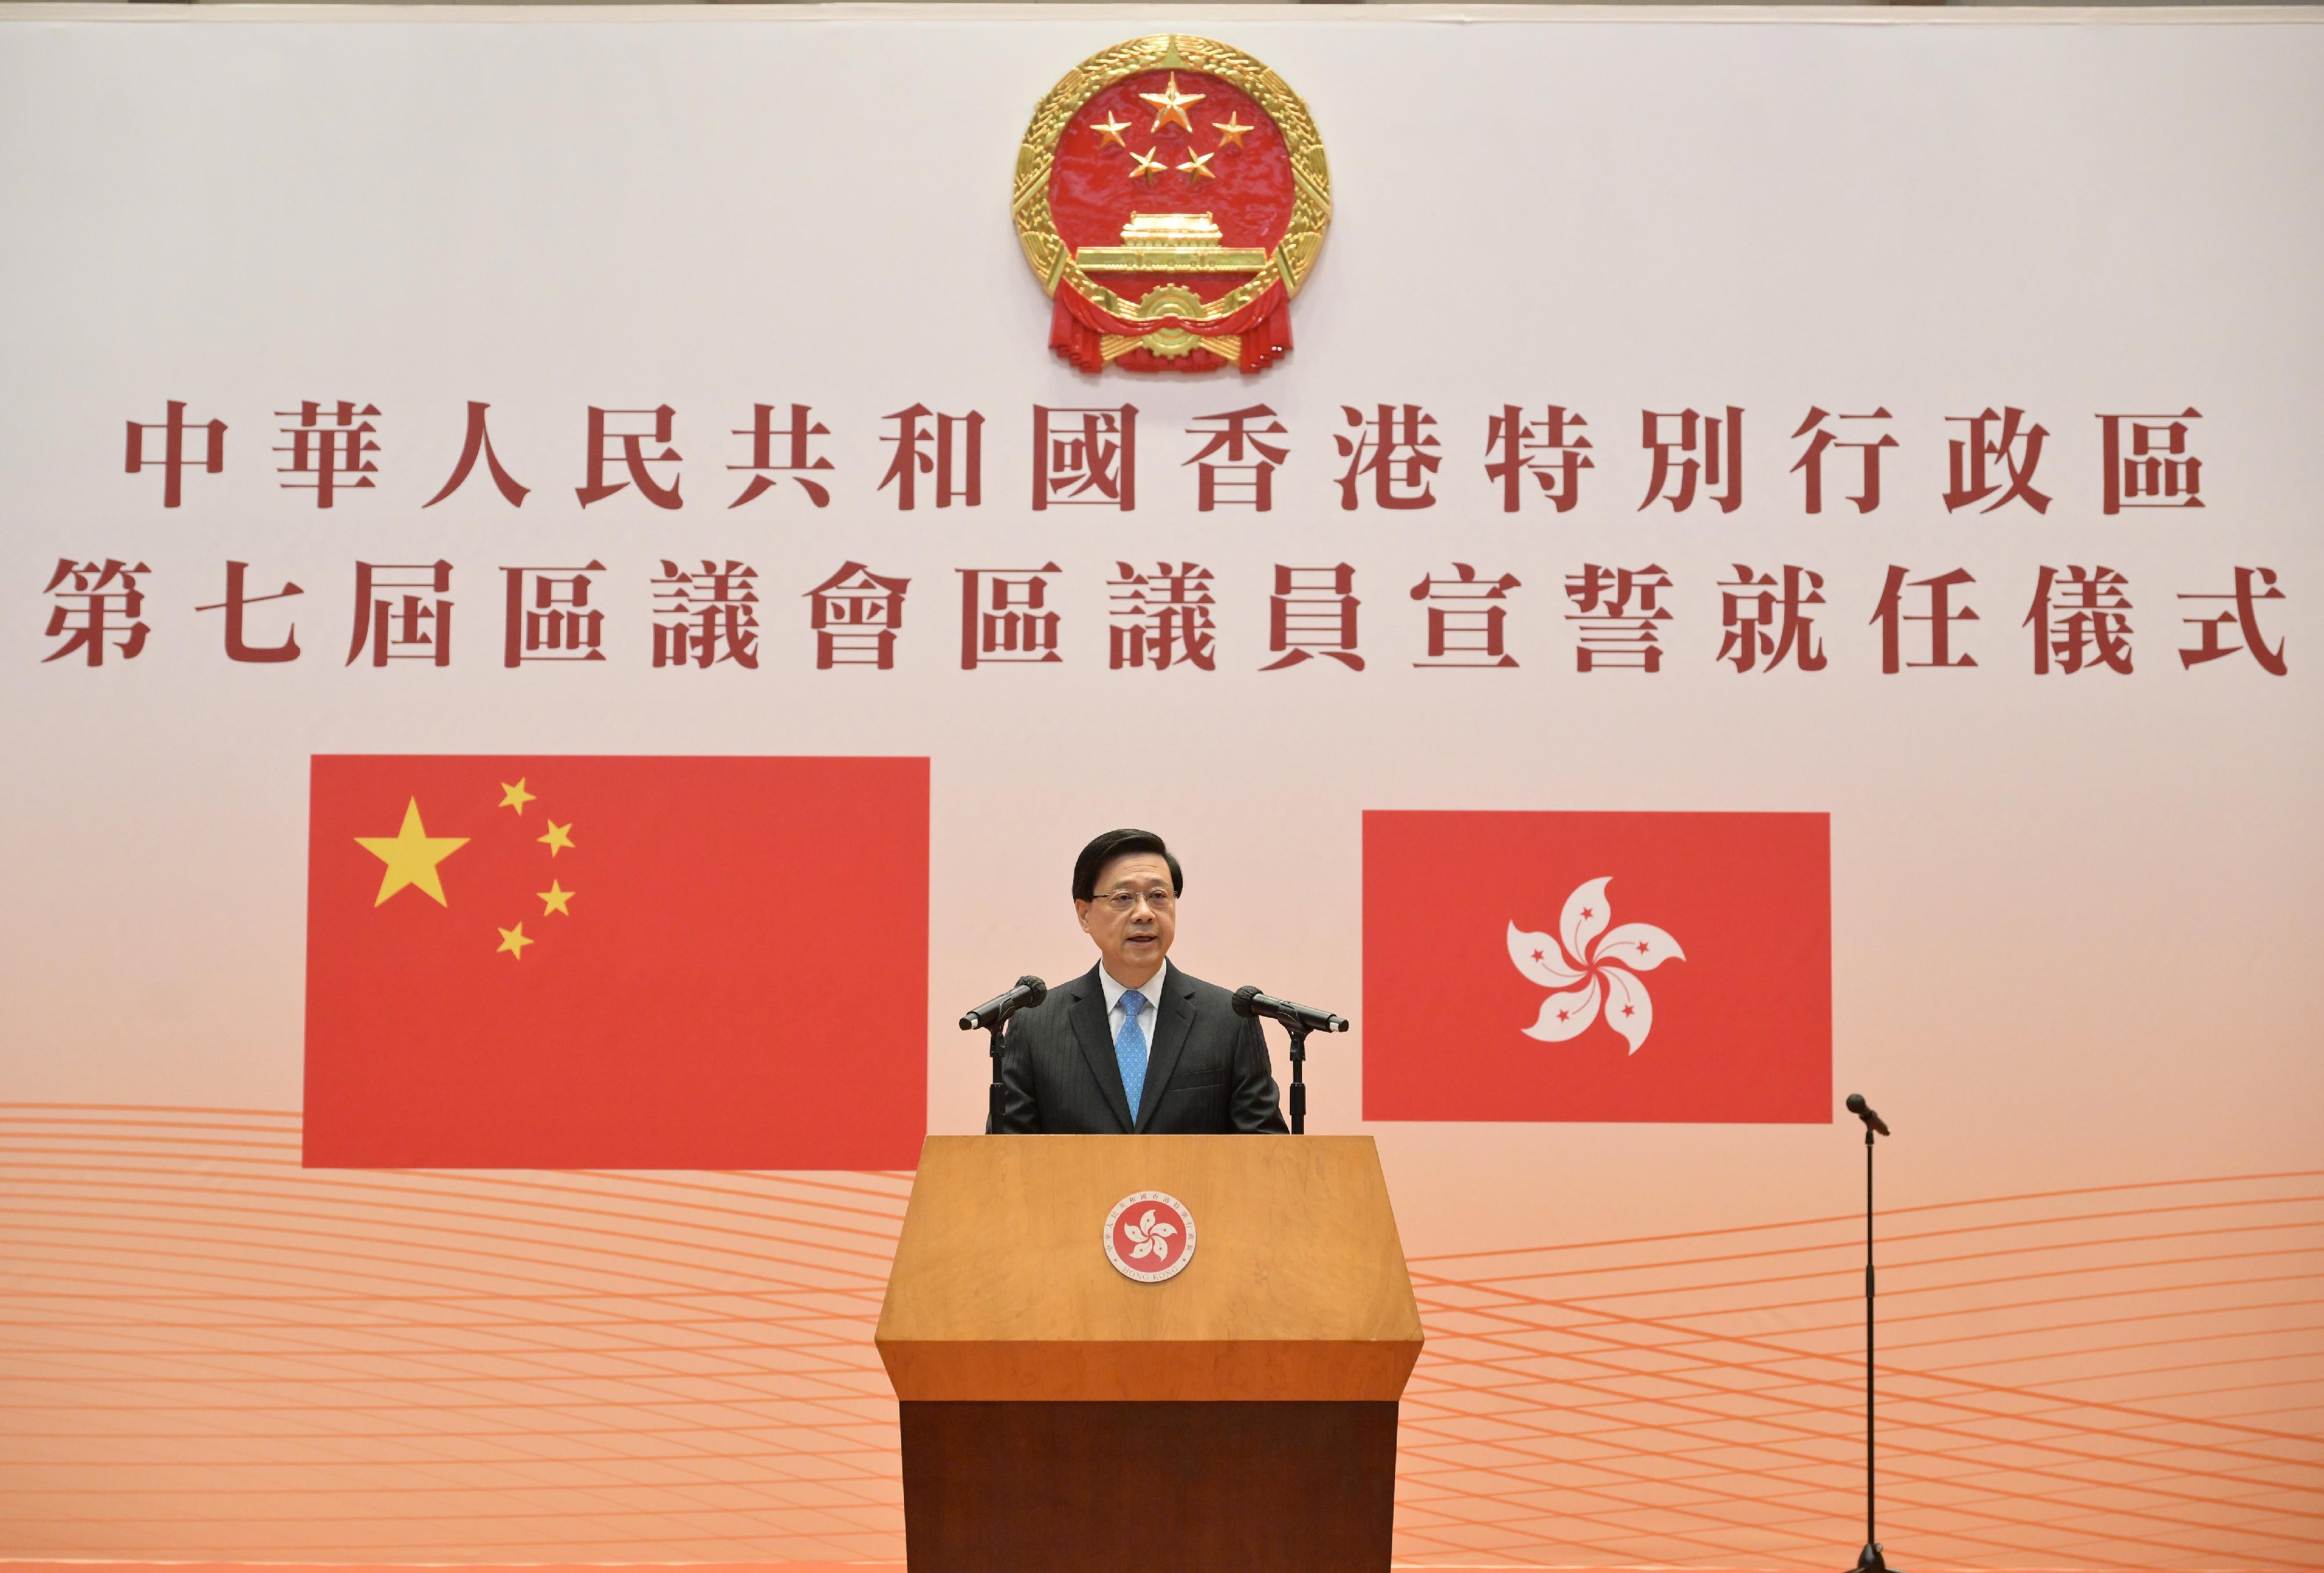 The Government held the oath-taking ceremony for members of the seventh term District Councils at the Conference Hall of the Central Government Offices today (January 1). Photo shows the Chief Executive, Mr John Lee, delivering a speech at the ceremony.